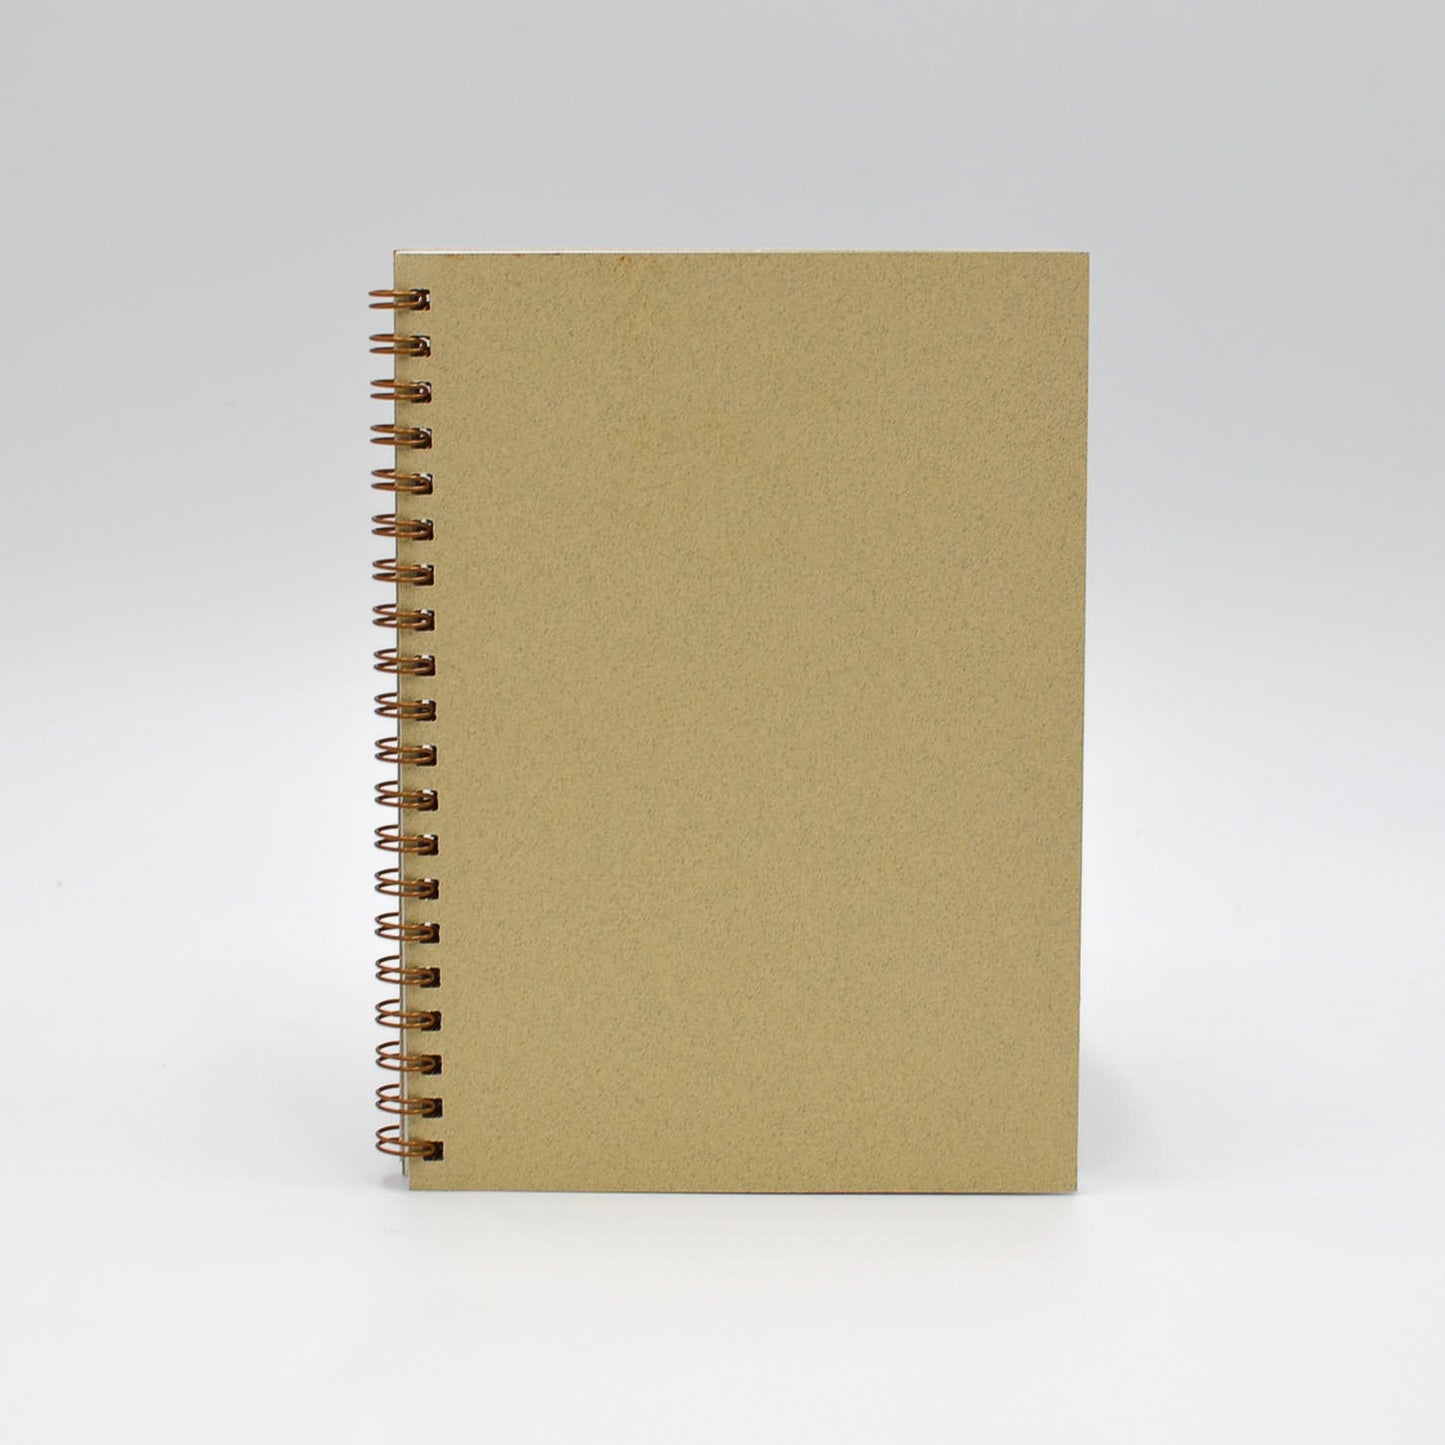 Journal Refill: 1271 Wirebound 5 x 7 Journals  Black or Sand cover, white paper. Gray-lined or blank sheets. Wire-bound refill. Back to journal refill makes for easy insertion into your cover.